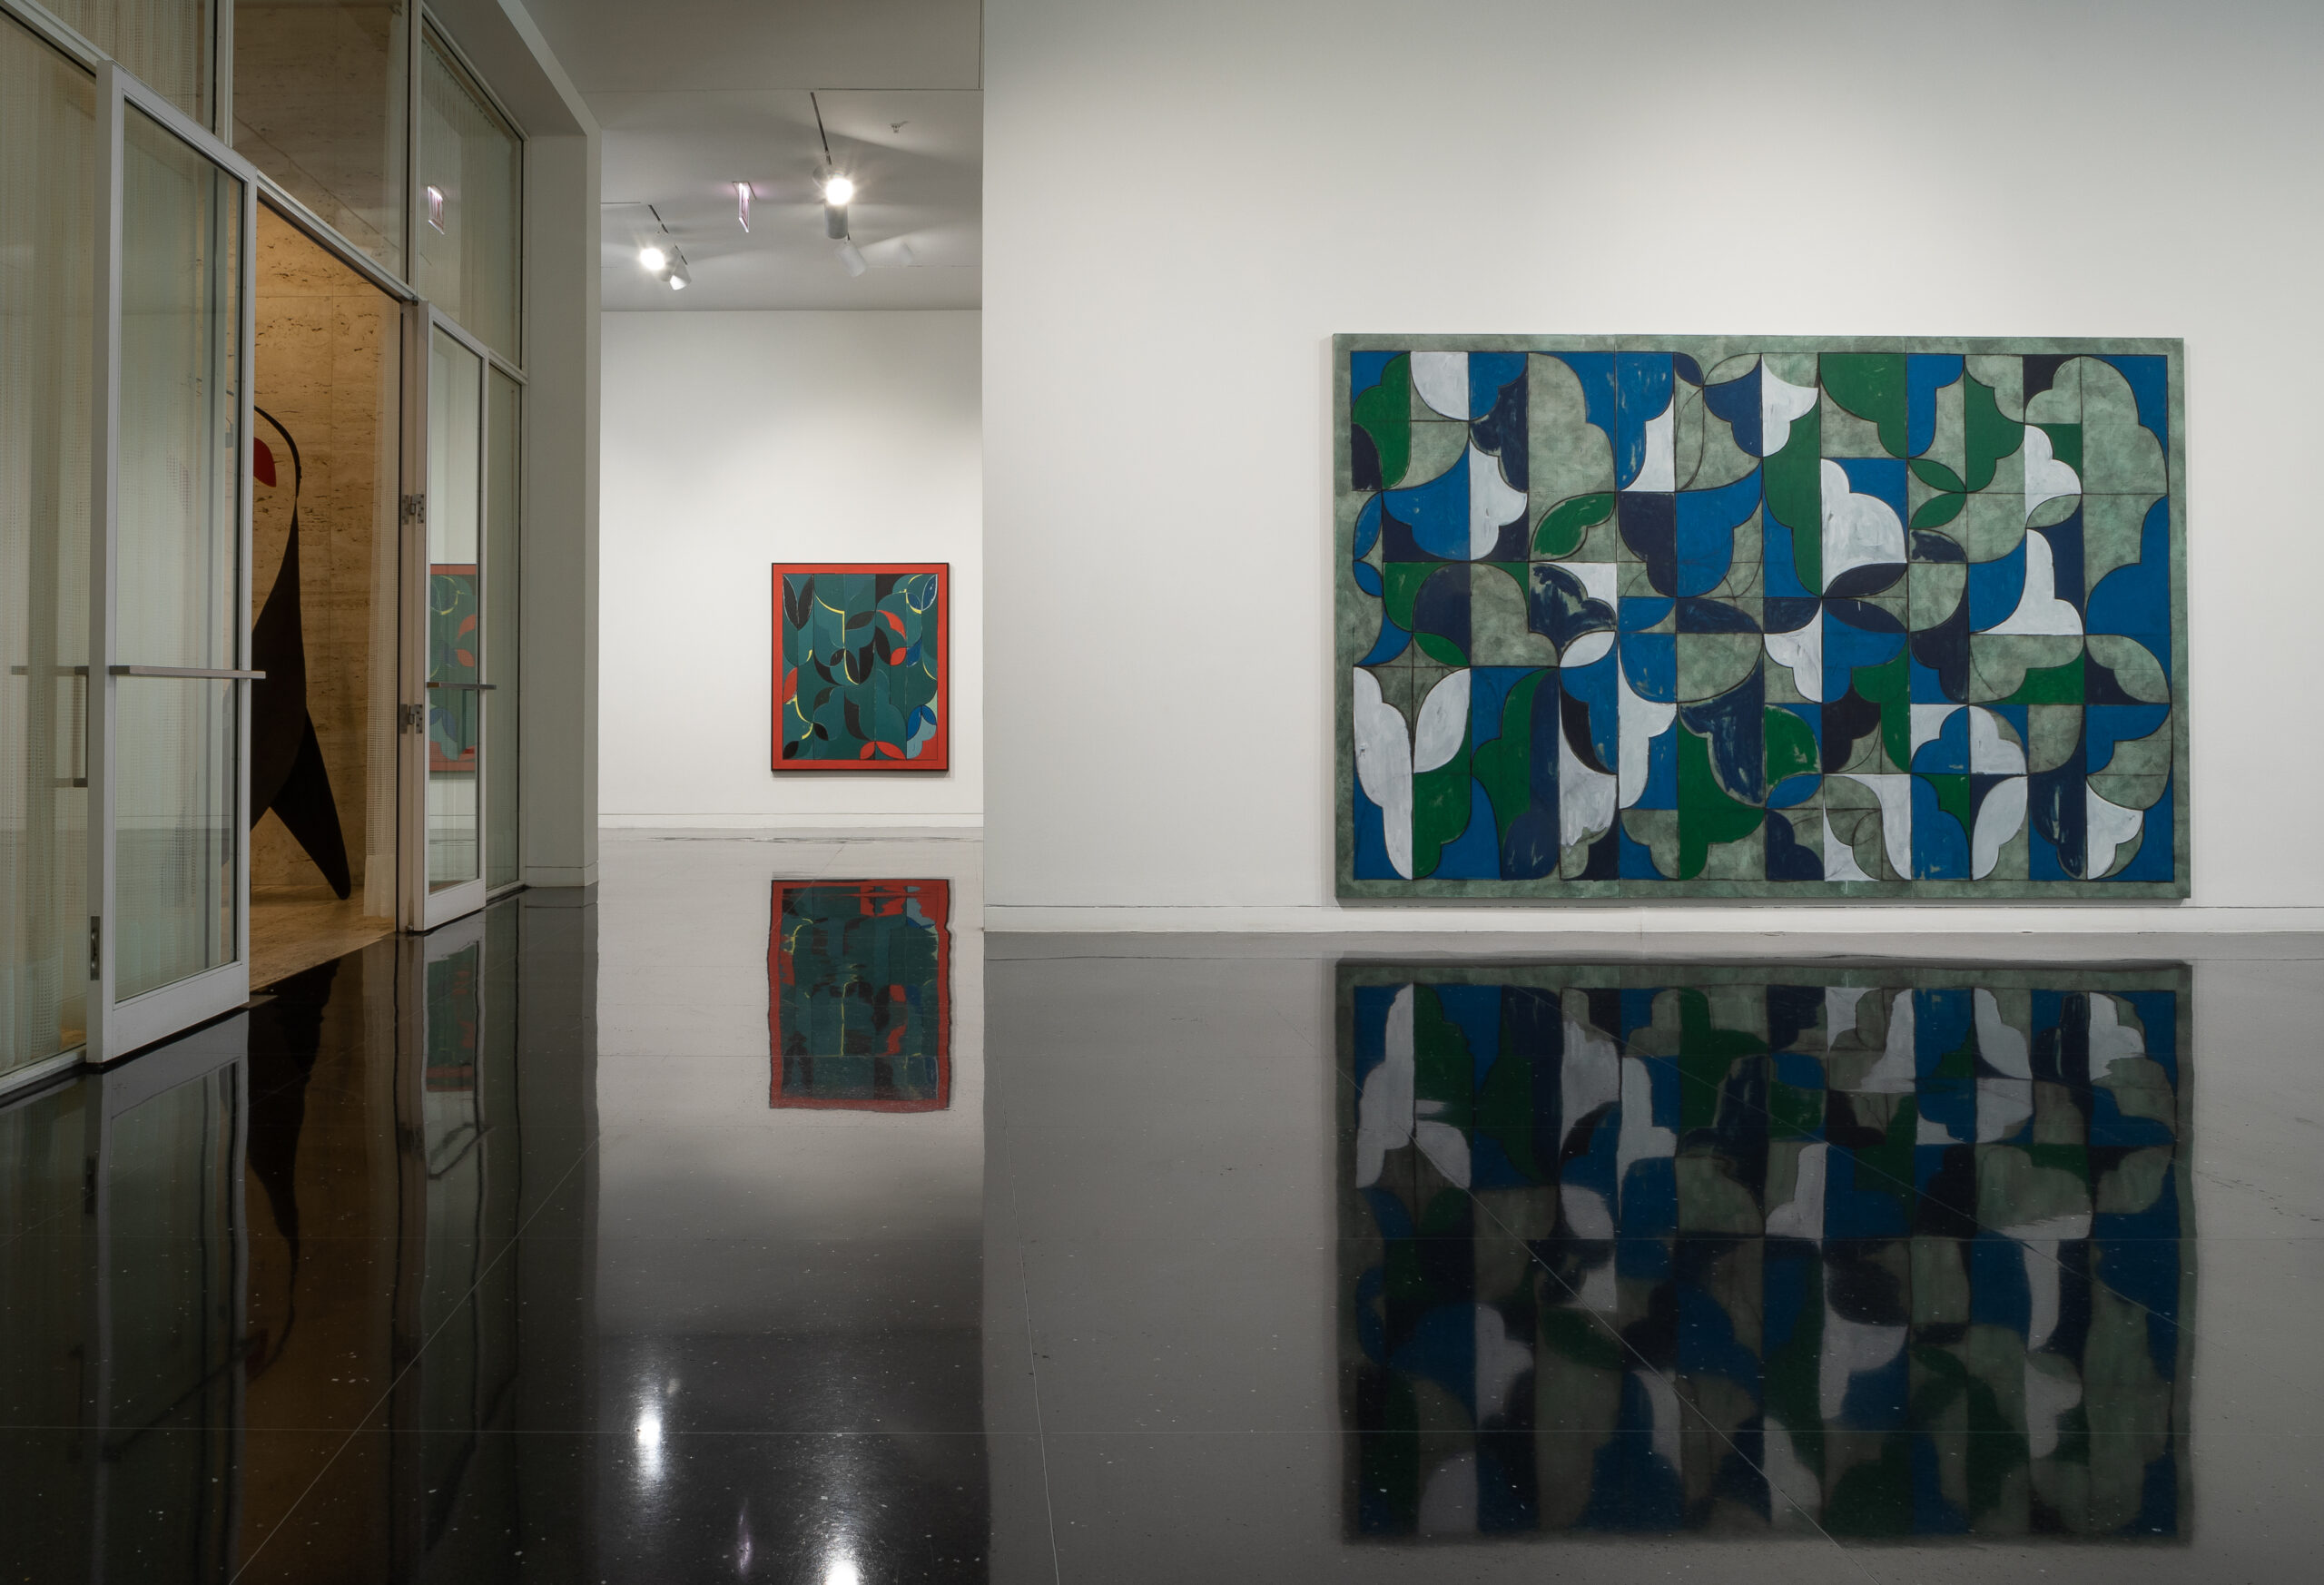 A large, nearly wall-sized abstract painting with blue, white, gray, and green interlocking shapes displayed on a white gallery wall. To the left of this painting in the distance, another abstract painting is visible on a far wall.